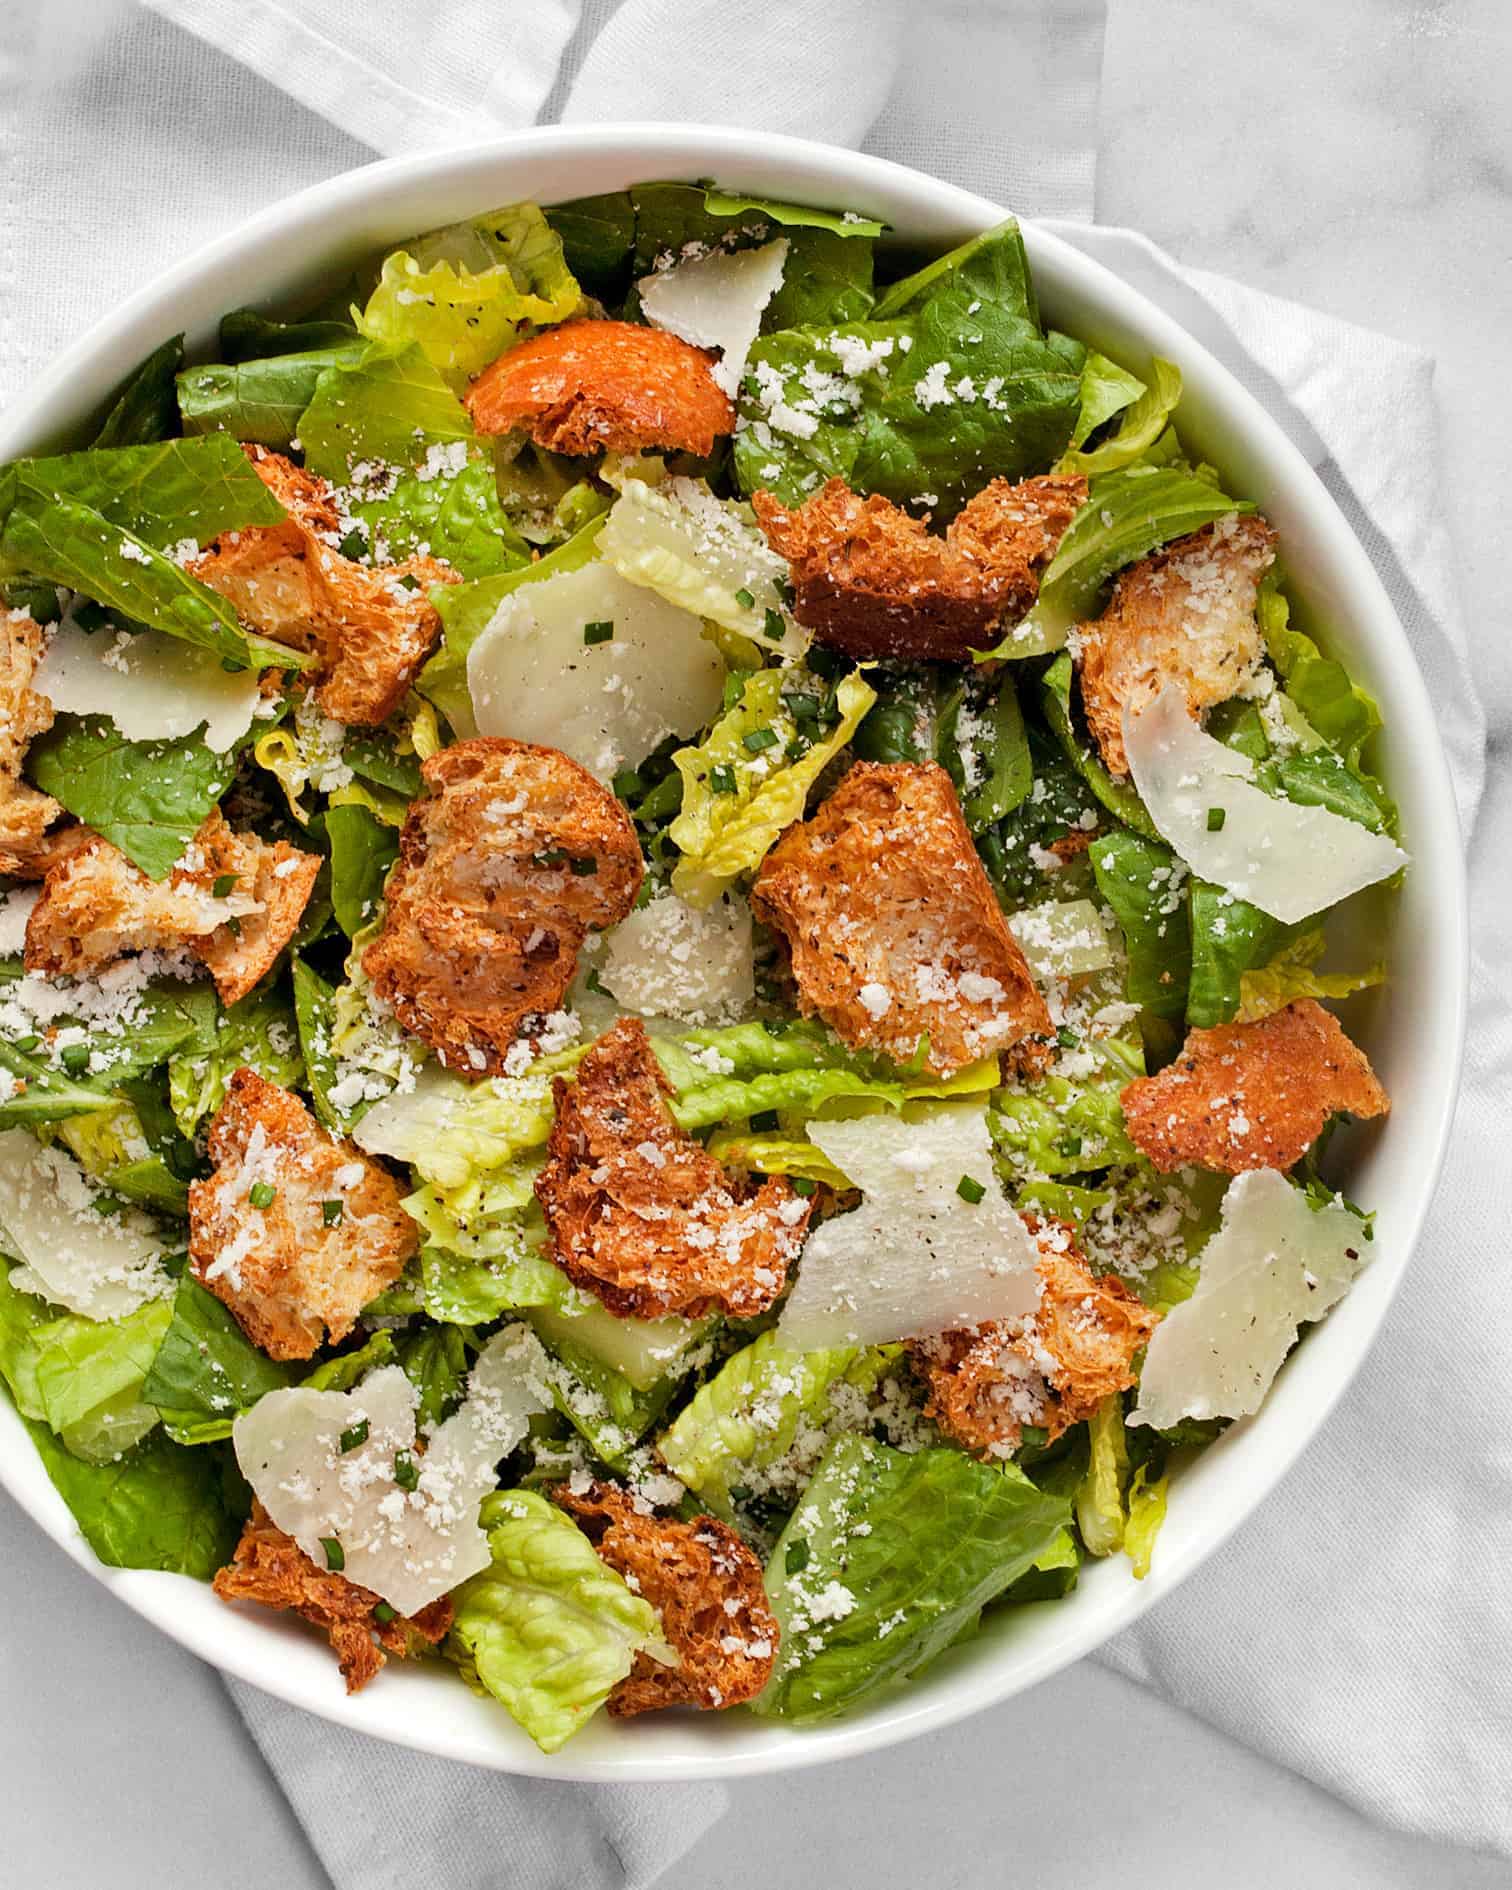 Romaine salad with croutons and Parmesan cheese.